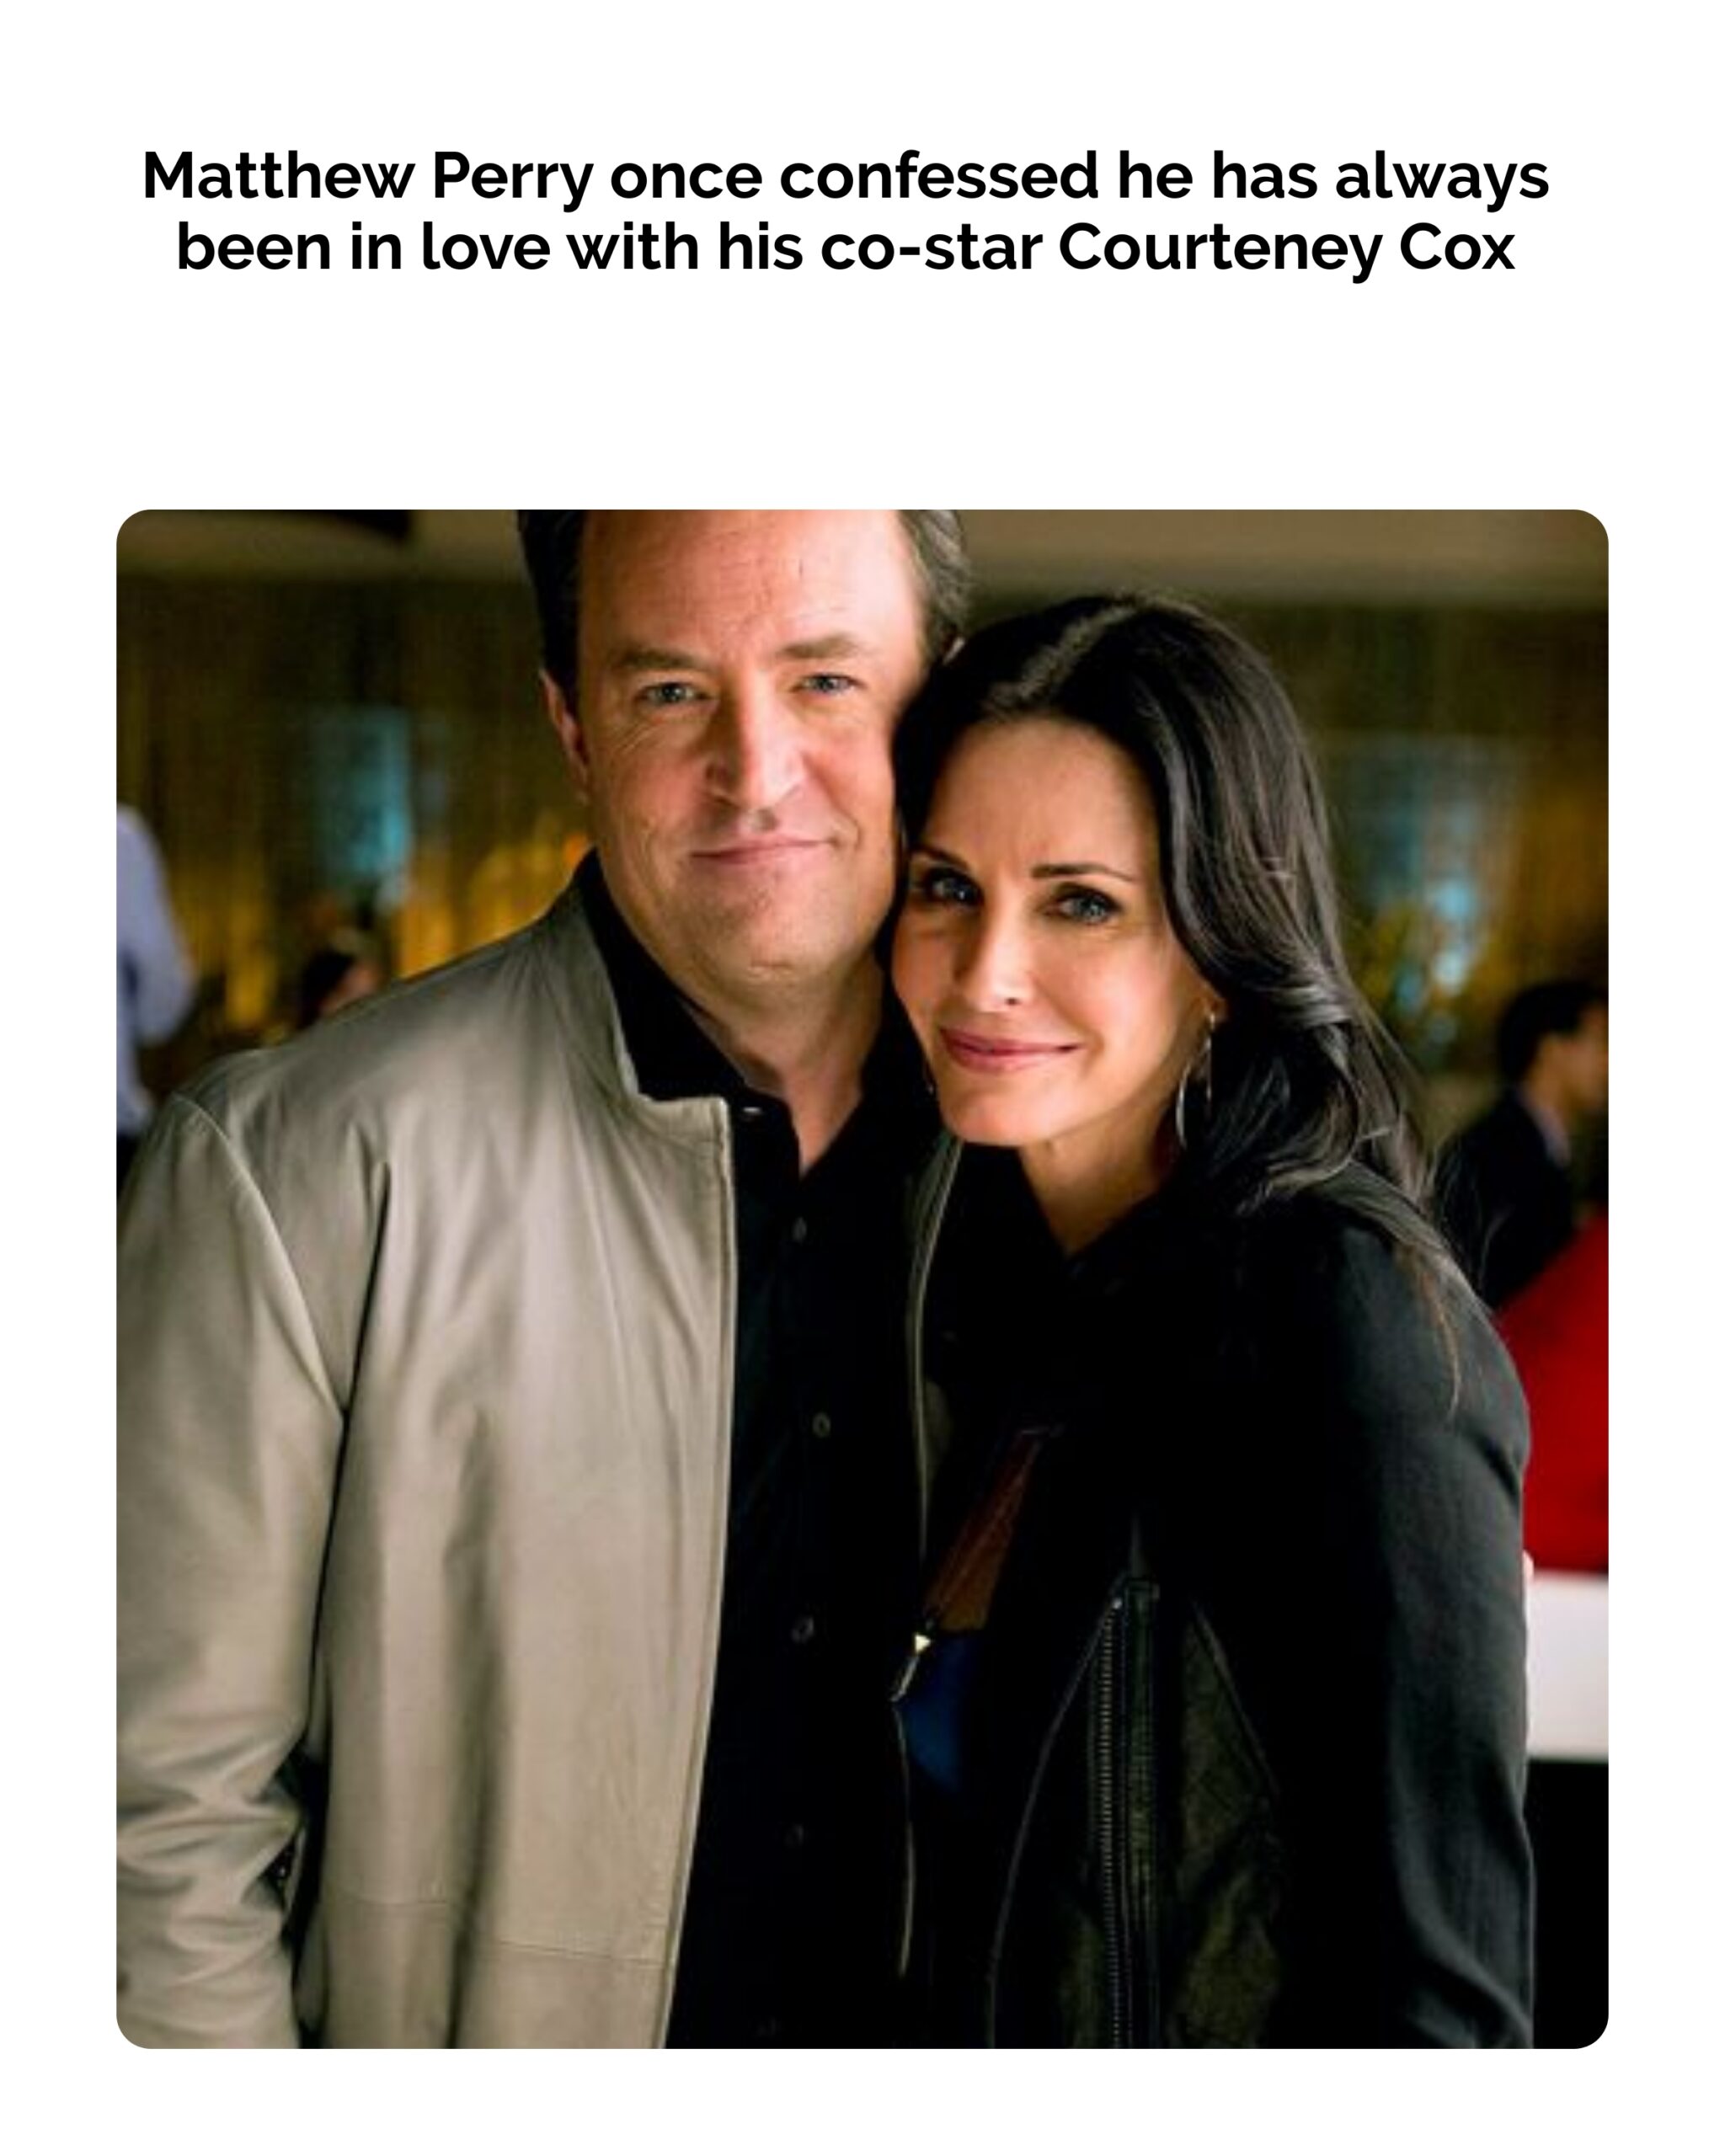 Matthew Perry Once Confessed He Has Always Been in Love With His Co-Star Courteney Cox